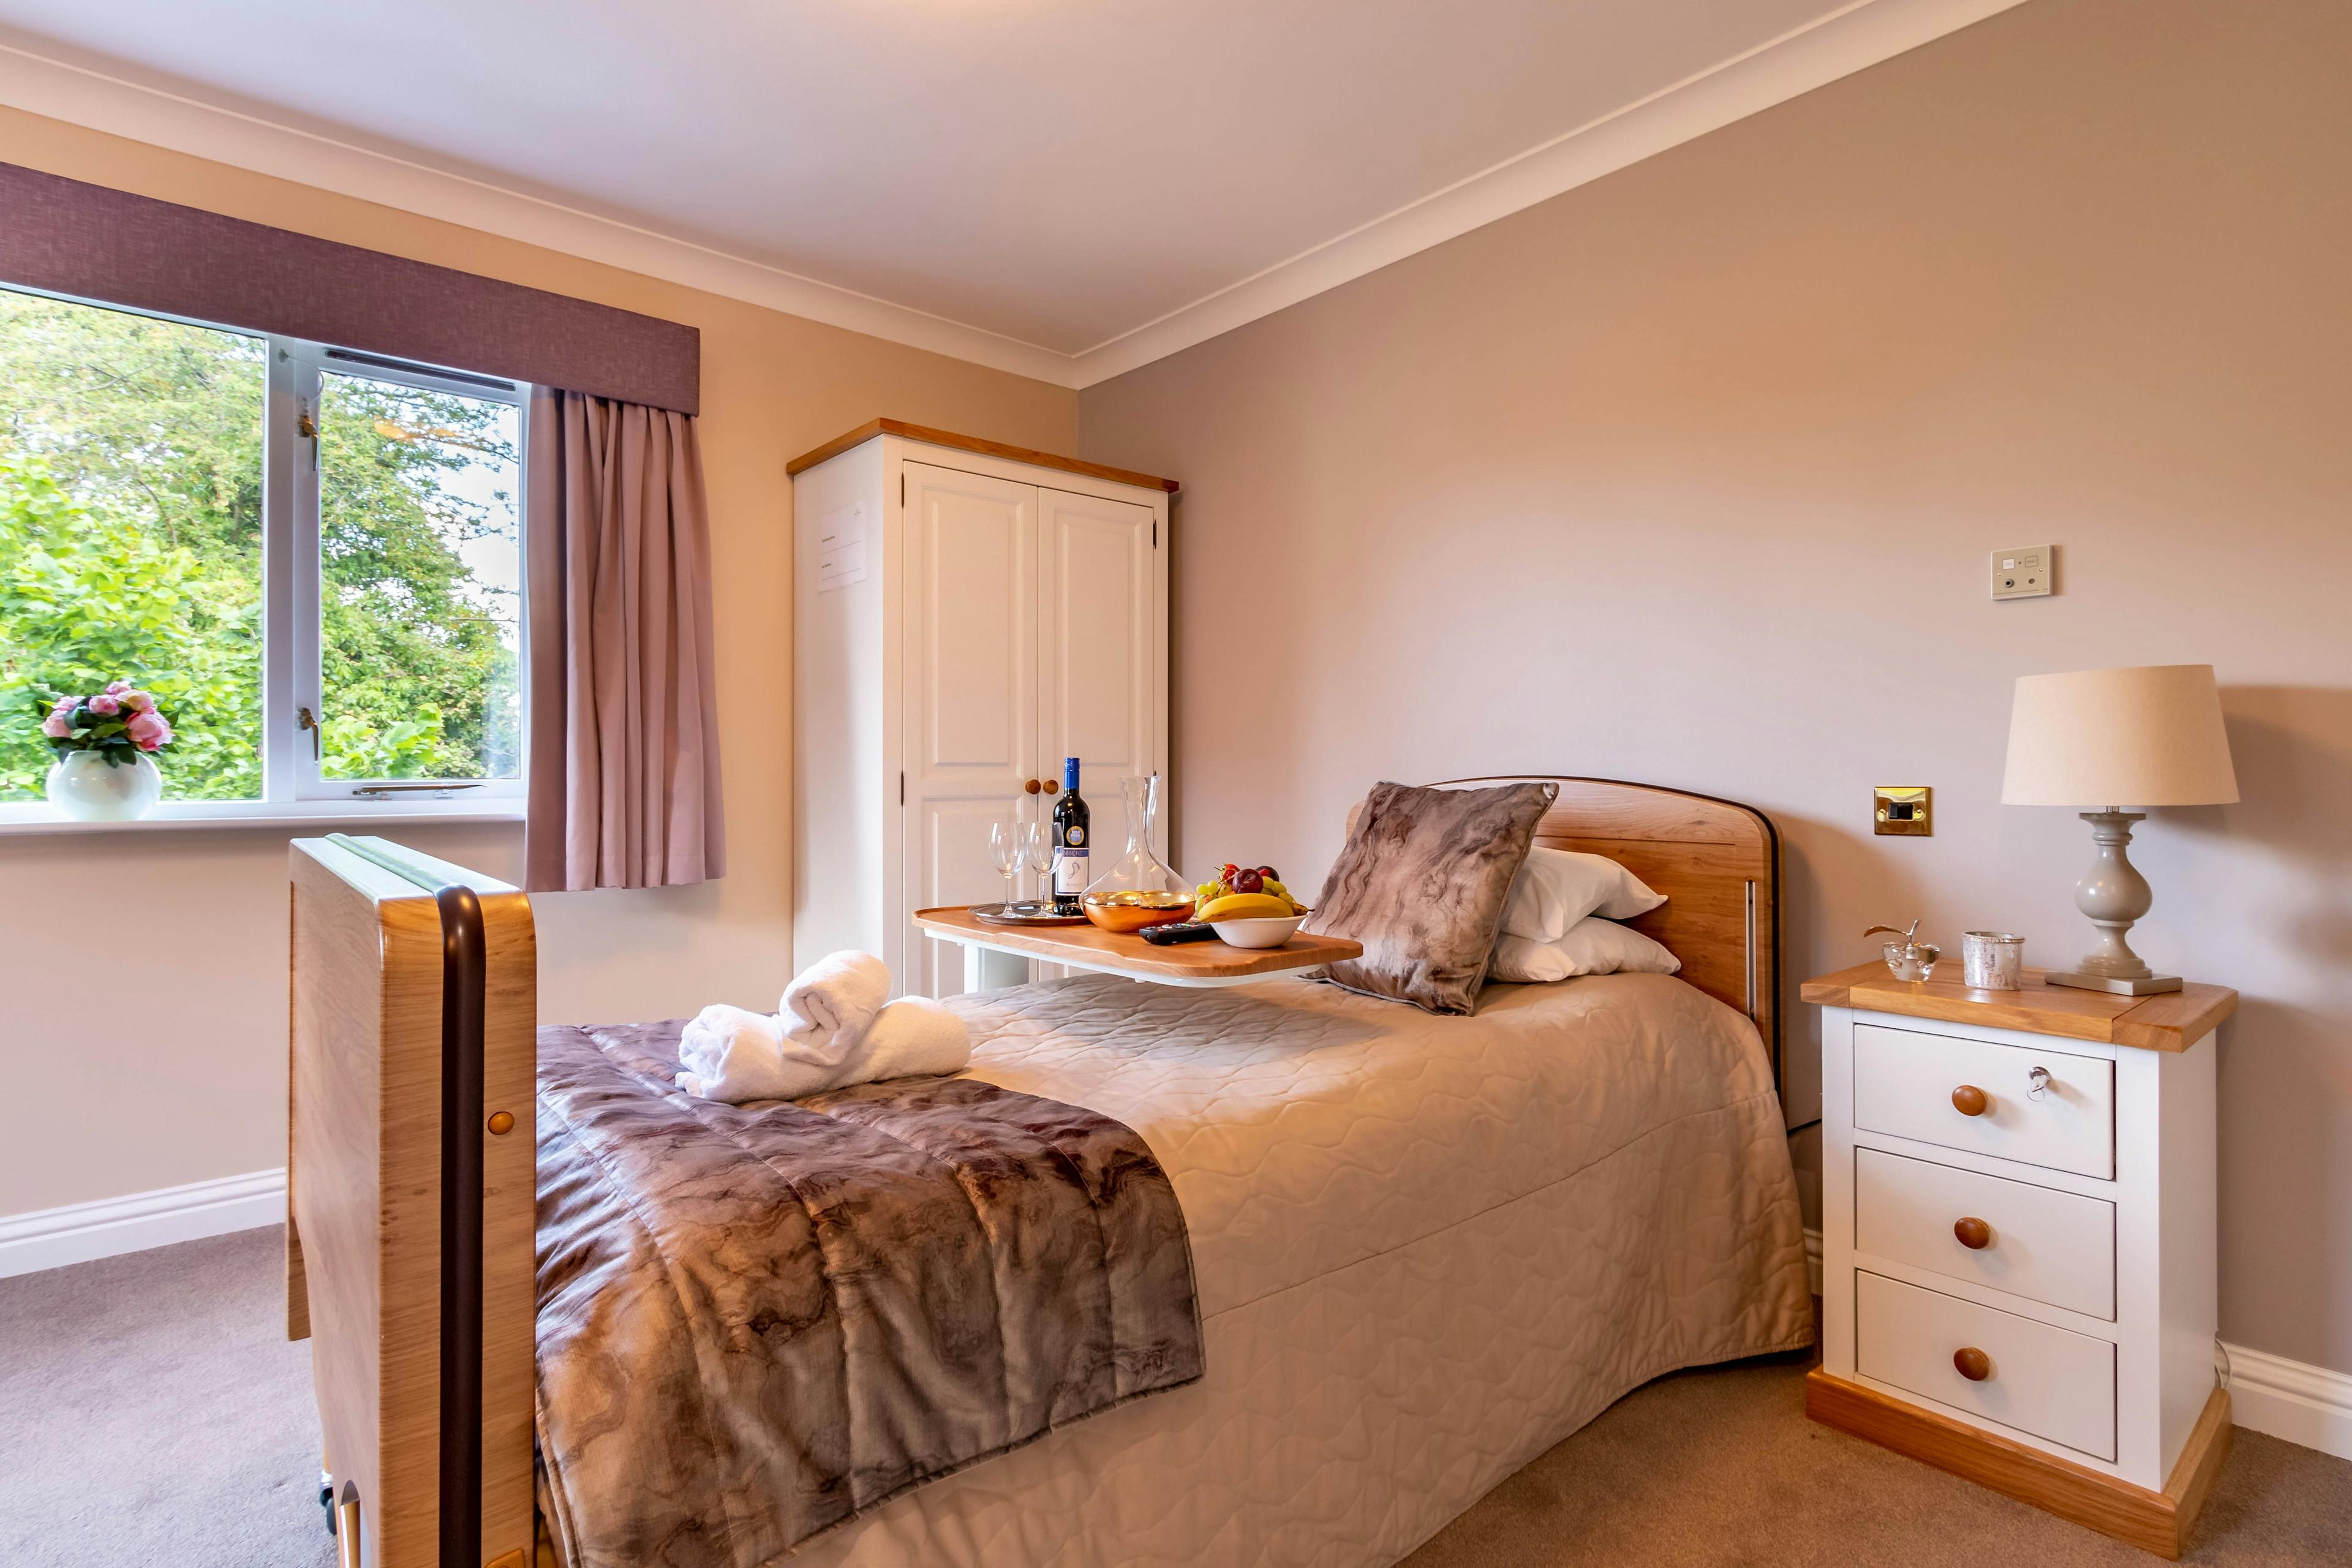 Bedroom at Longueville Court Care Home in Peterborough, Cambridgeshire